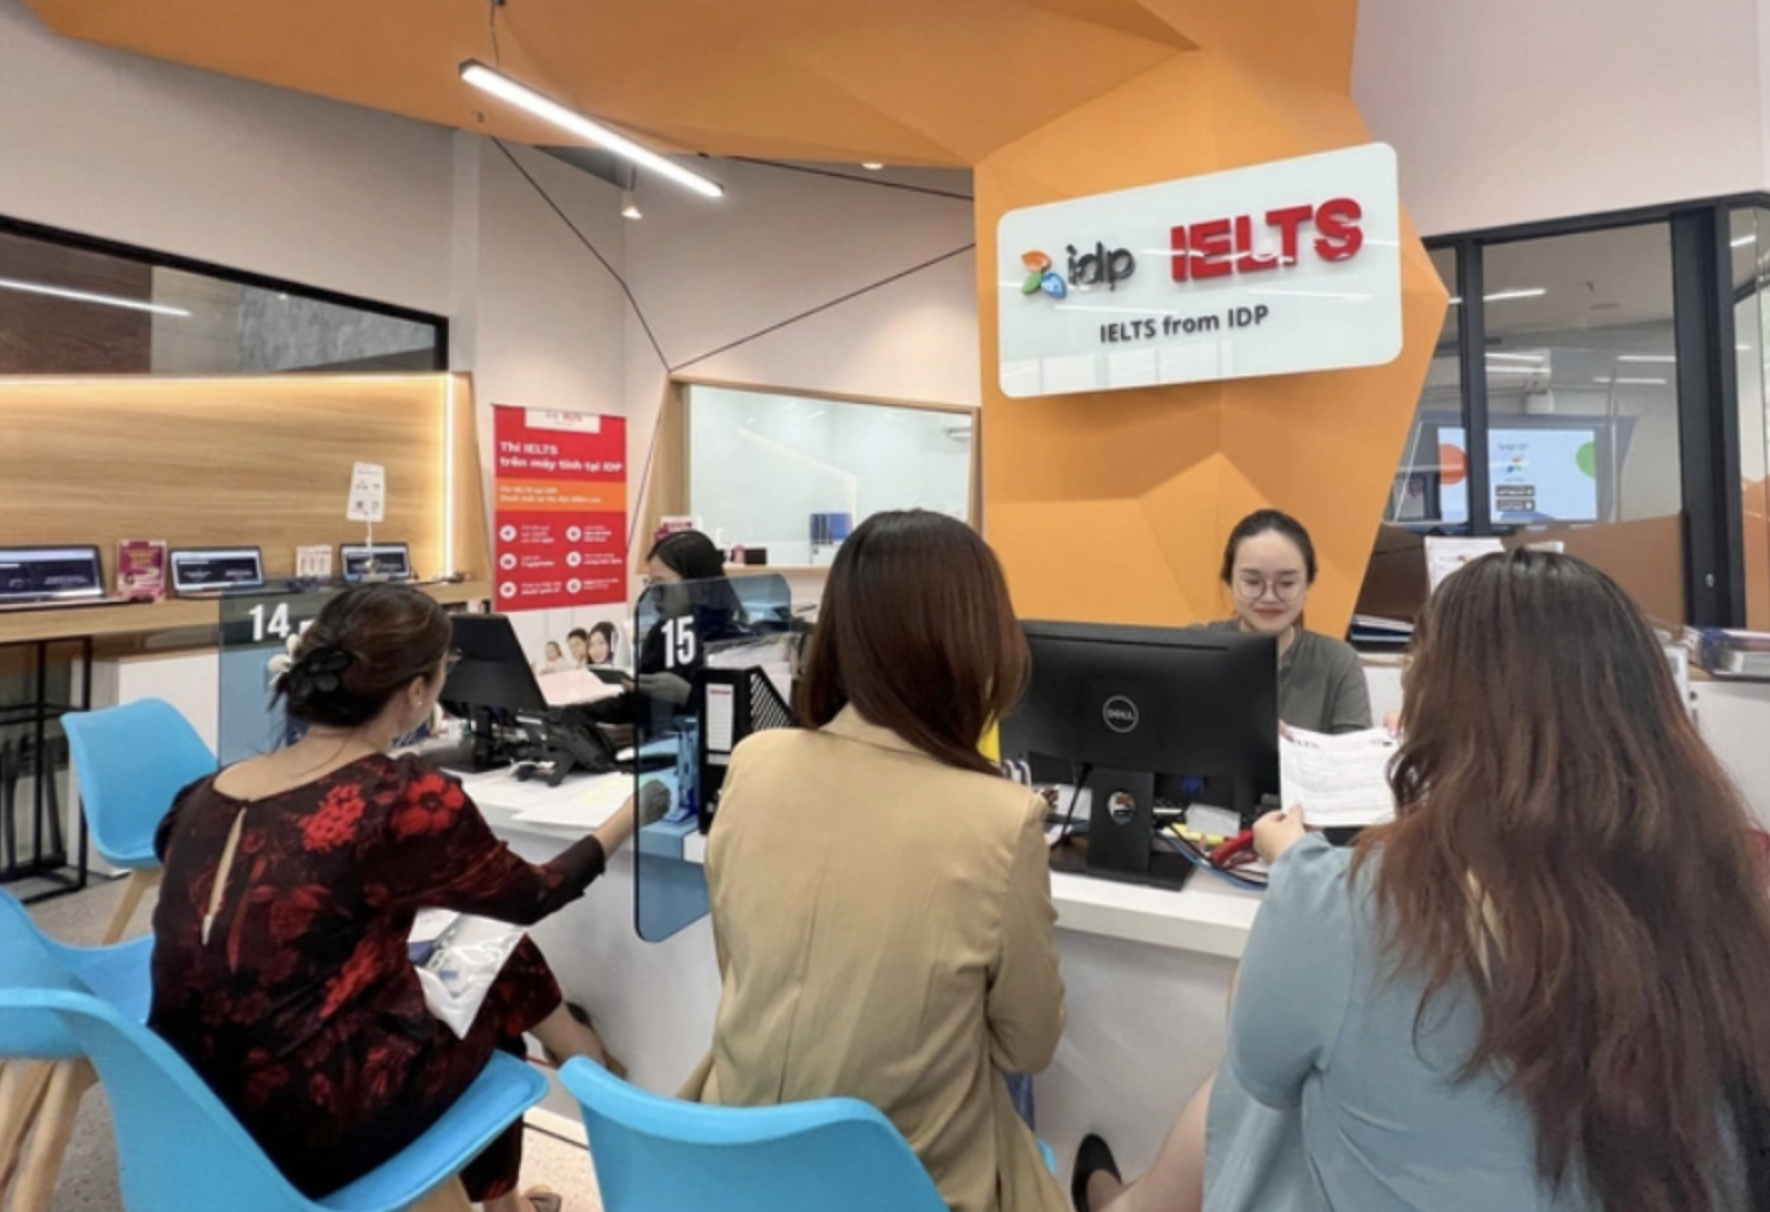 Ministry inspection finds over 56,000 IELTS certificates issued unlawfully in Vietnam